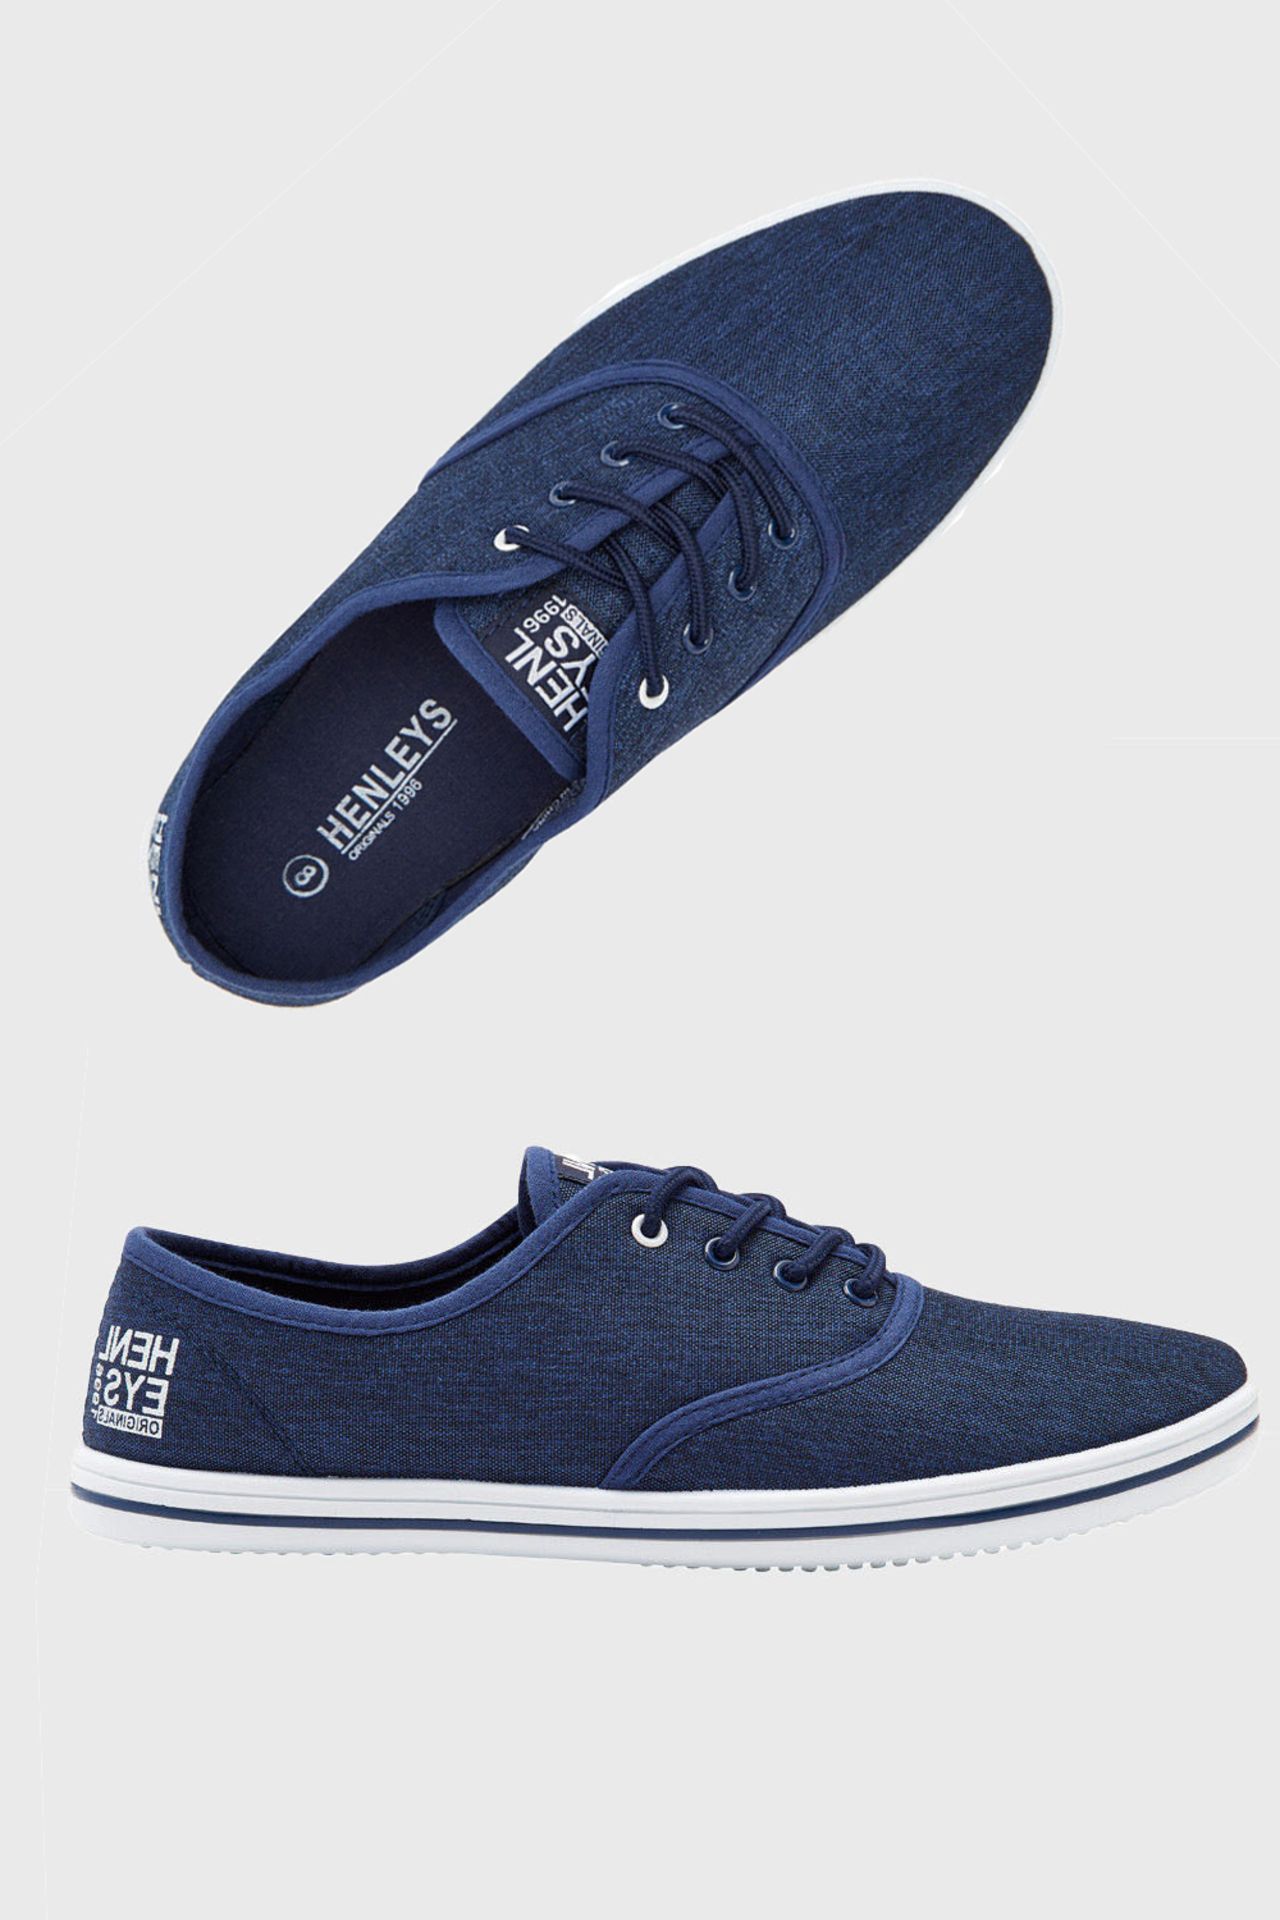 15 X BRAND NEW MENS HENLEY'S LACE UP NAVY AND GREY TRAINER PLIMSOLLS - IN MIXED SIZES TO INCLUDE